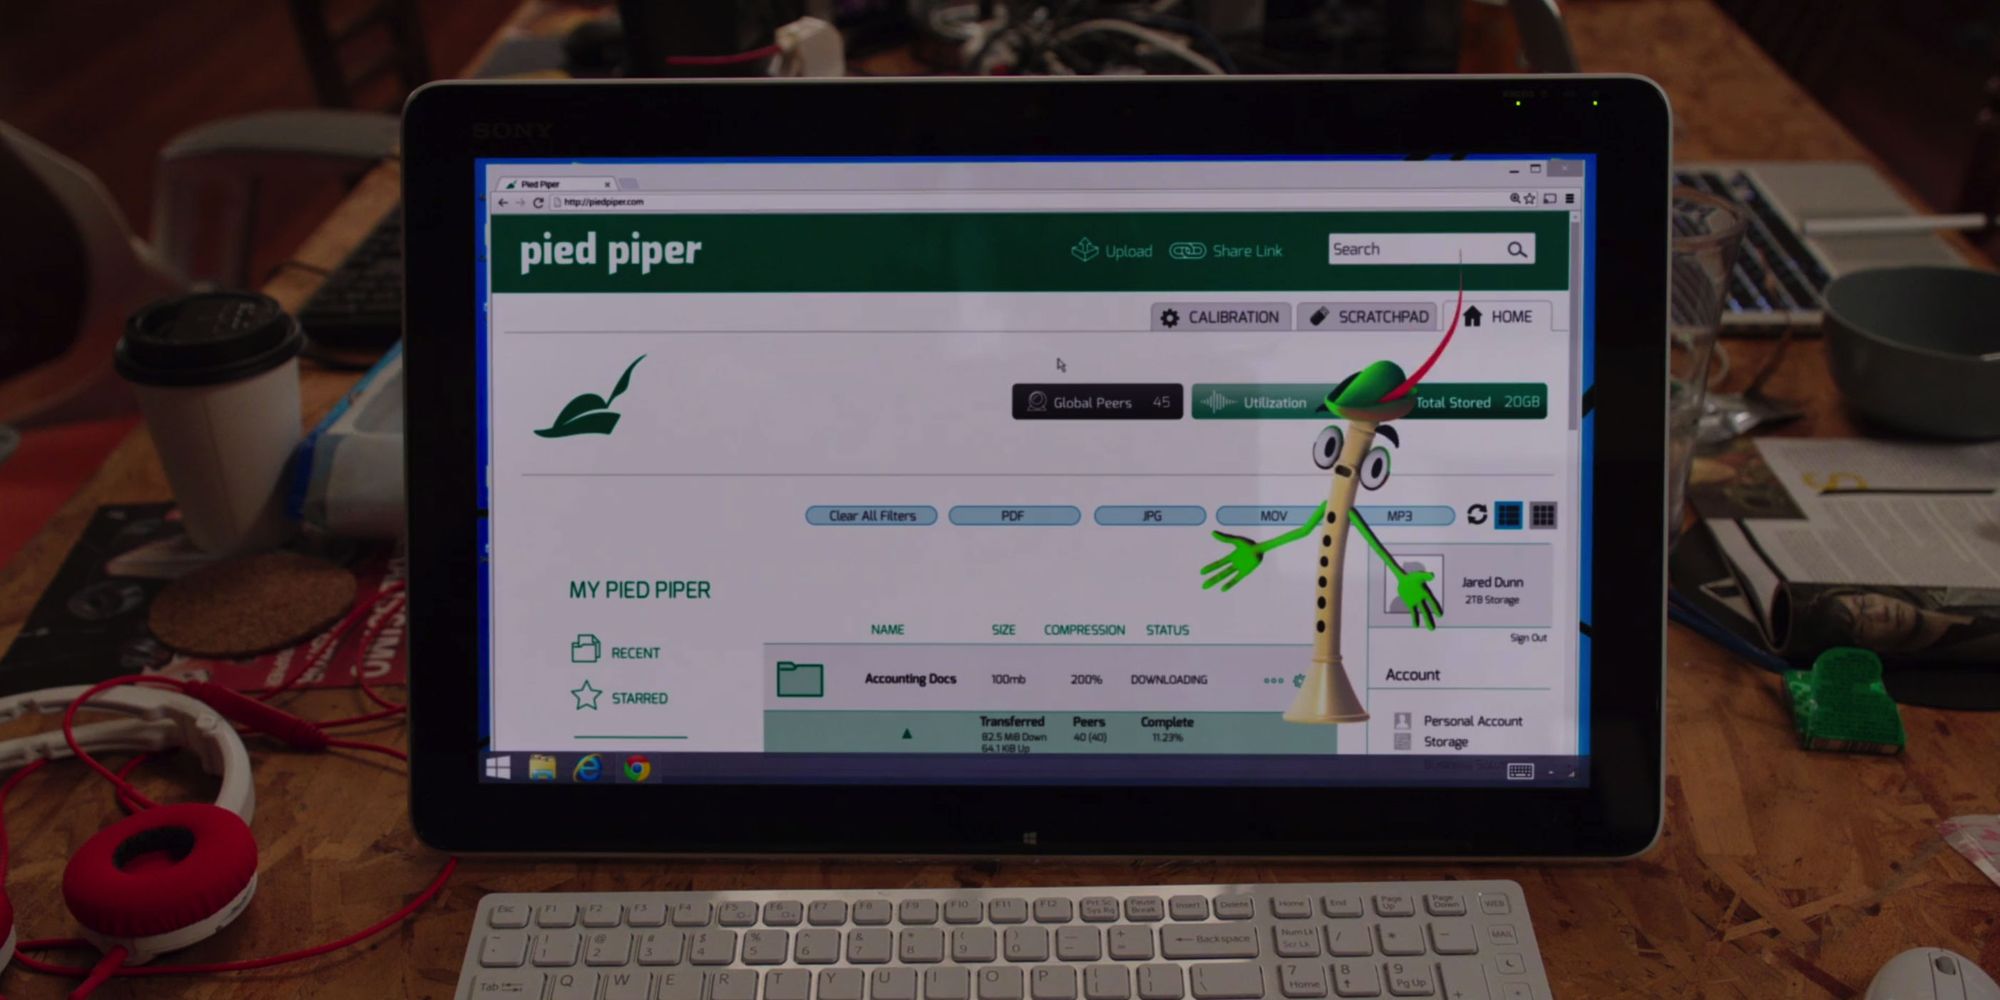 Fictional Pied Piper's app tanked because of a bad user experience